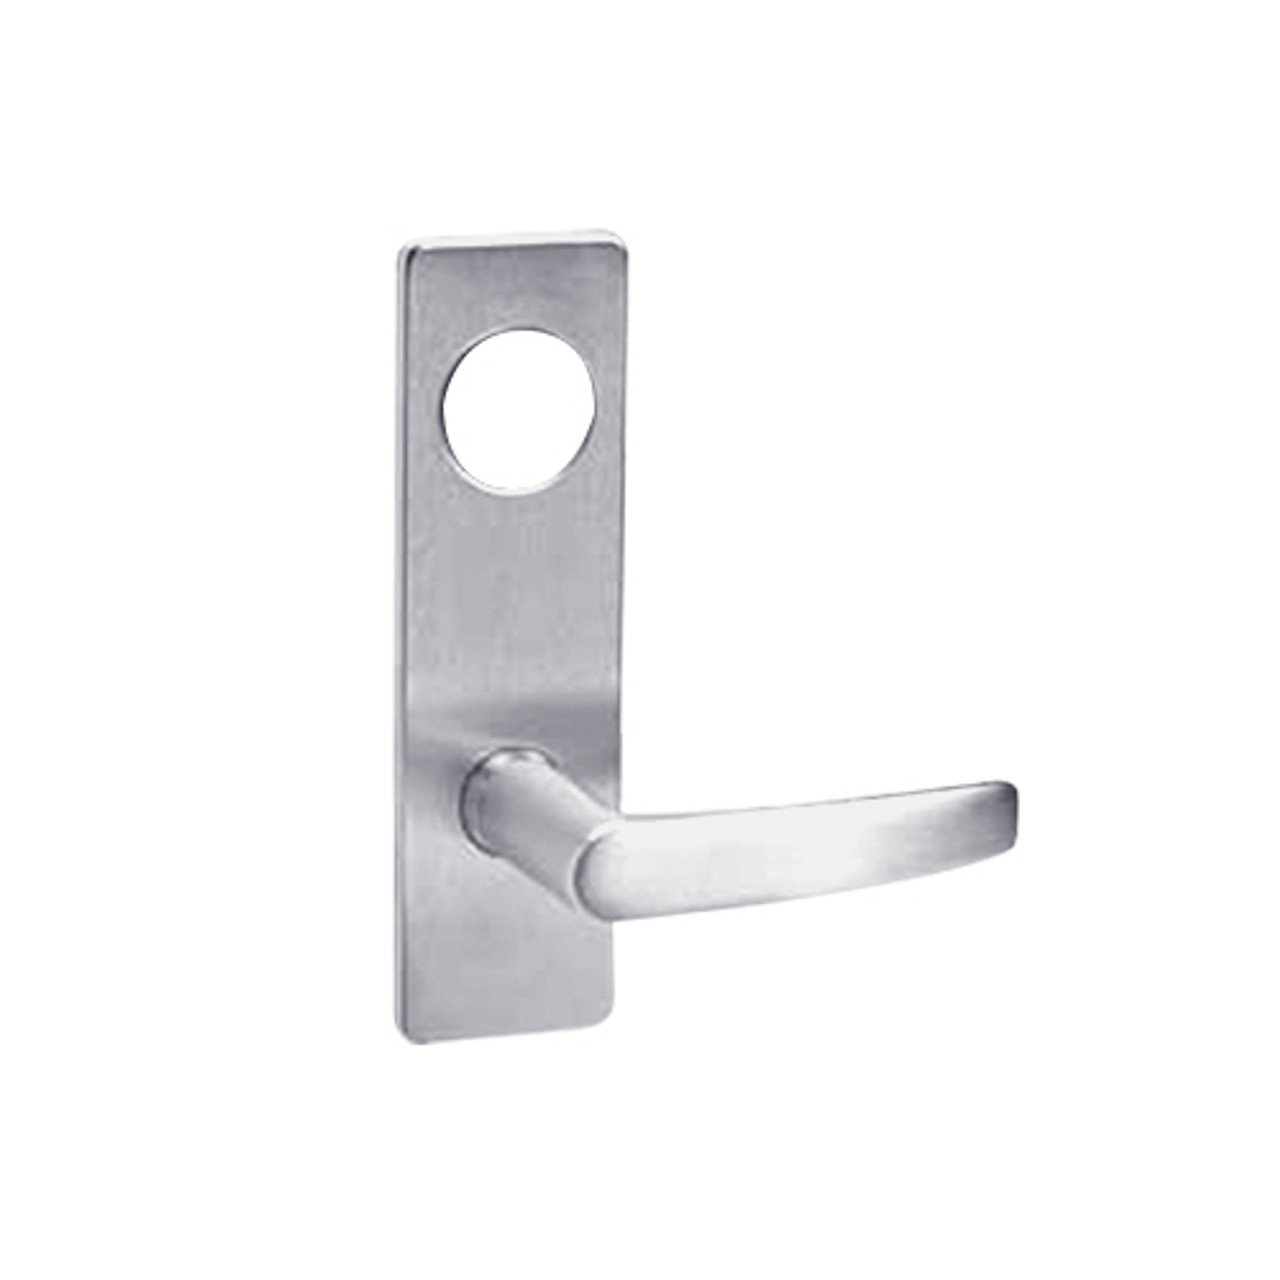 ML2042-ASN-626-LC Corbin Russwin ML2000 Series Mortise Entrance Locksets with Armstrong Lever in Satin Chrome